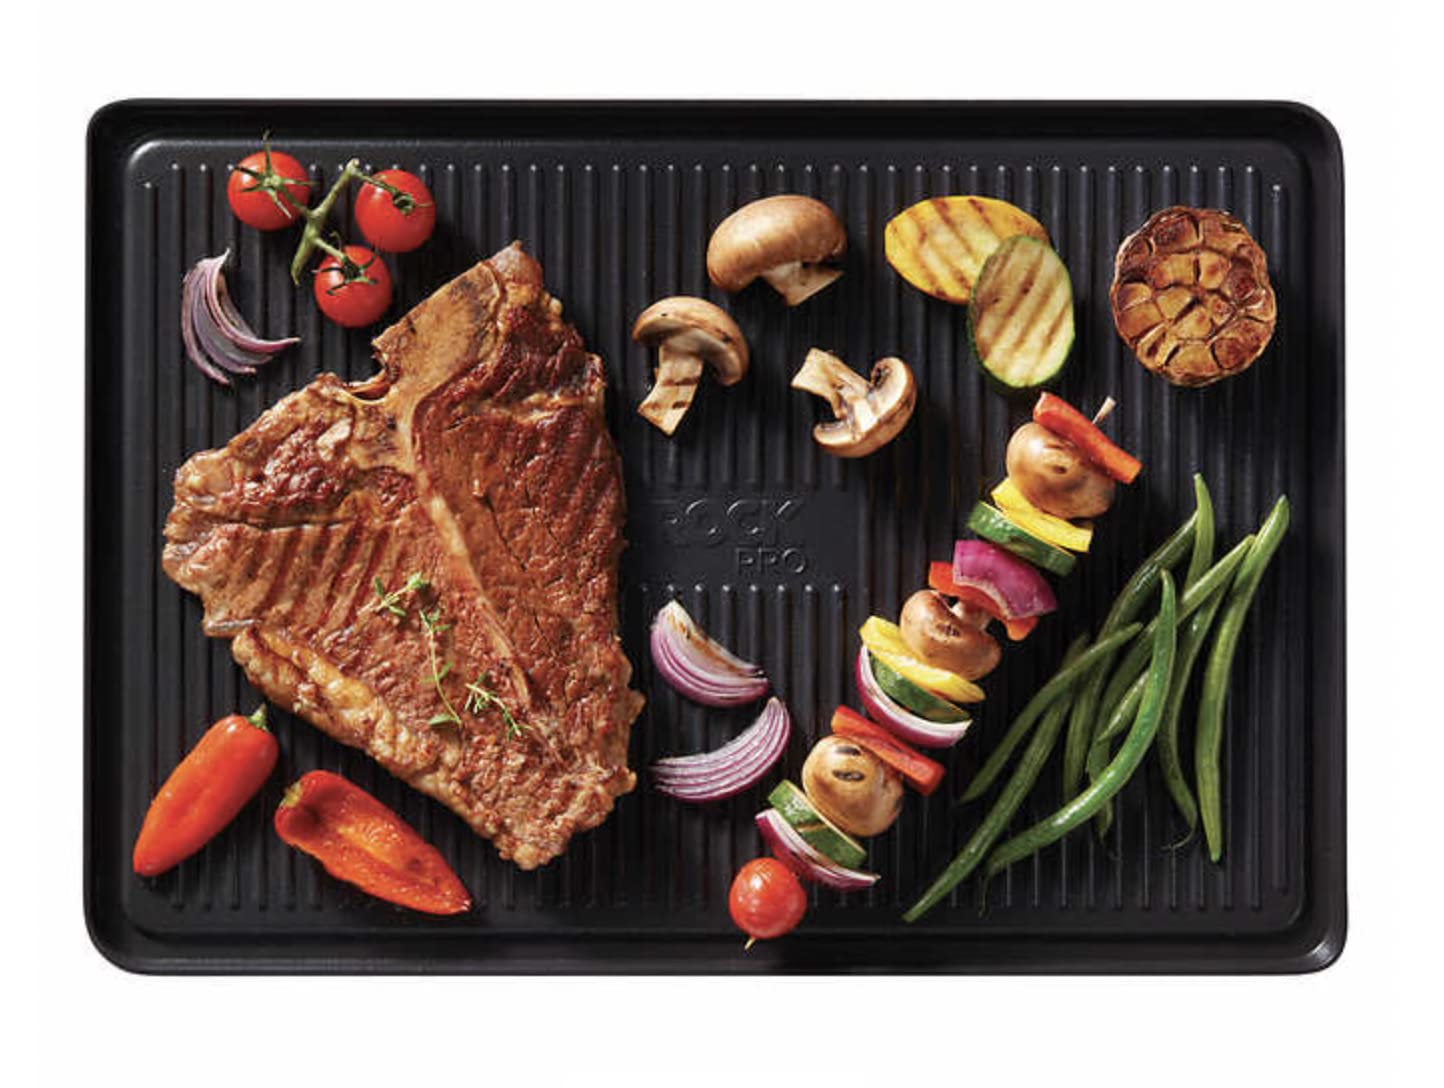 The Rock PRO Reversible Grill/Griddle Pan